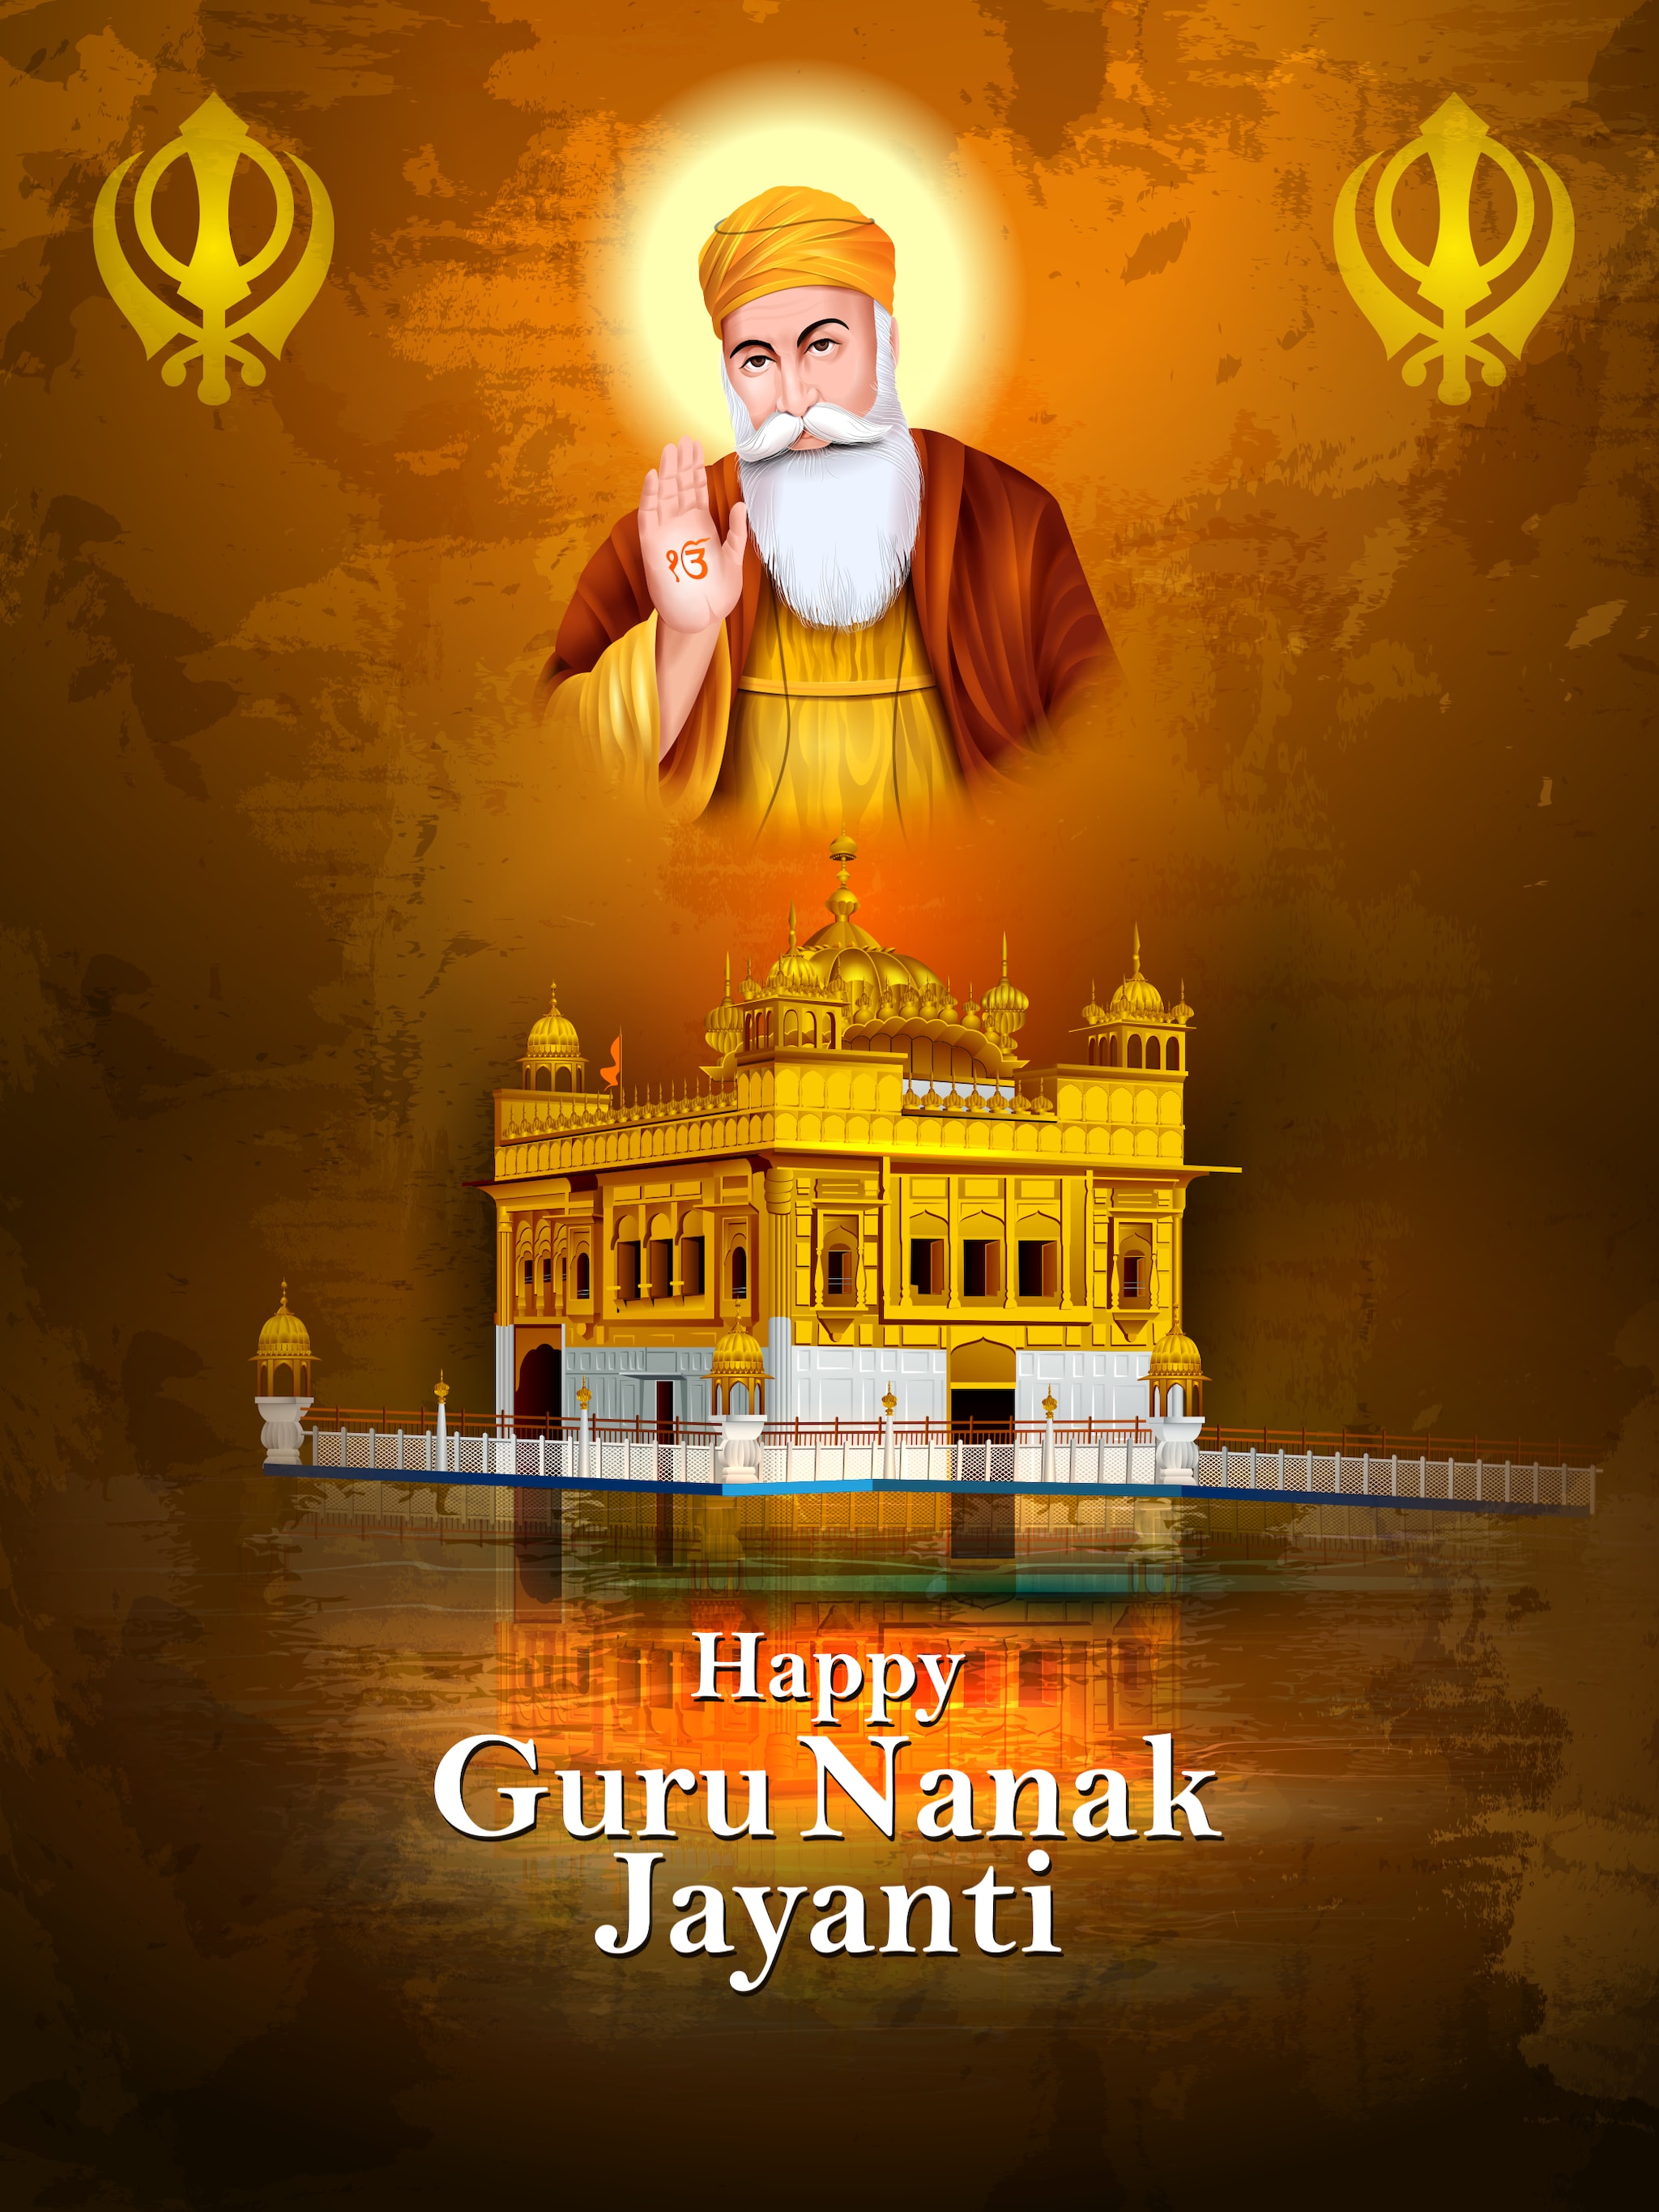 Happy Guru Nanak Jayanti 2021 Wishes Images, Wallpaper, Quotes, Status, Photos, Pics, SMS, Messages. (Image: Shutterstock)